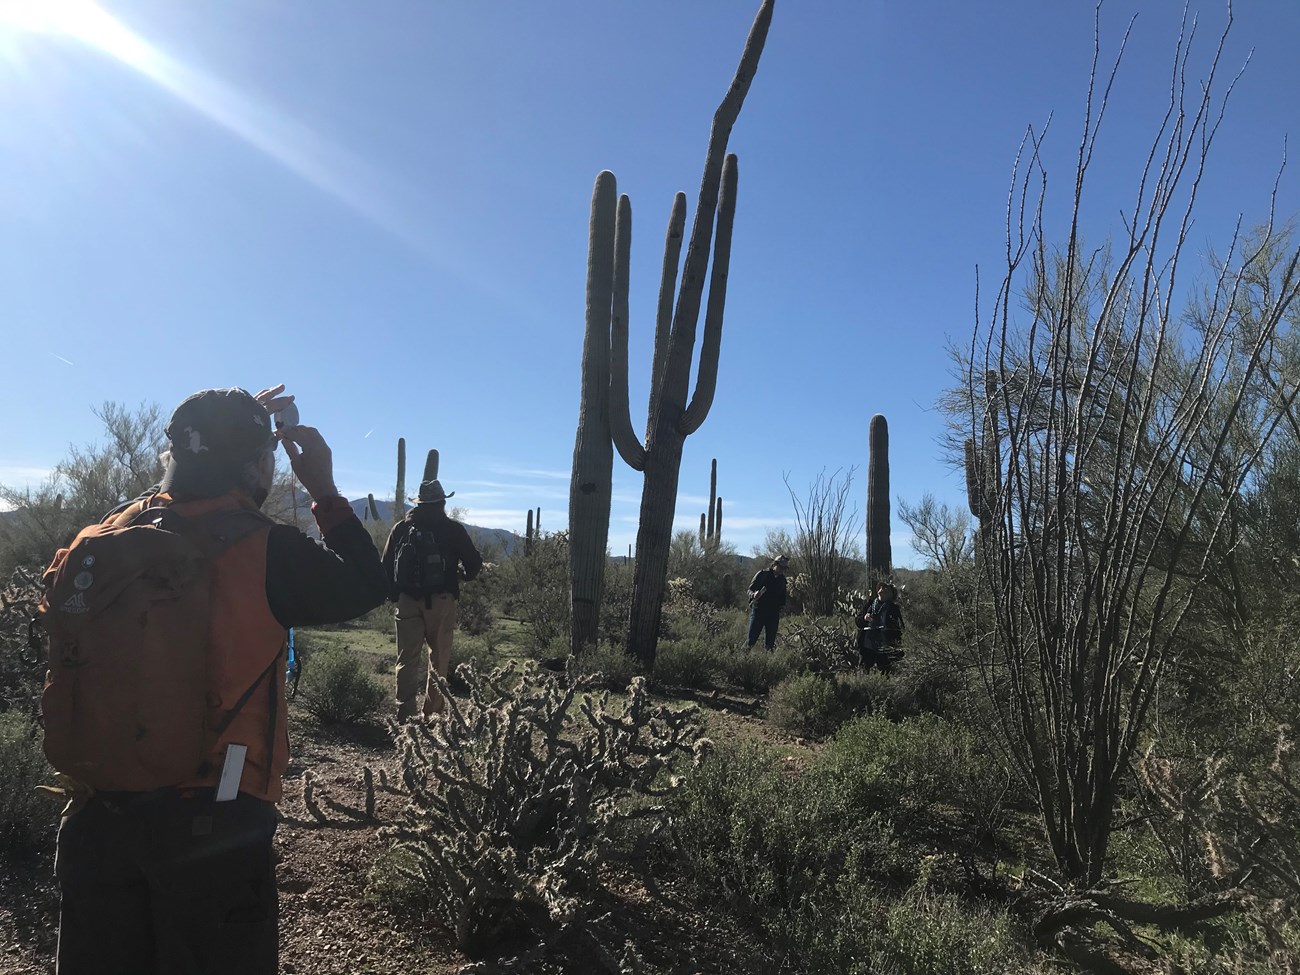 A person using a clinometer to measure the height of a giant saguaro in front of them.